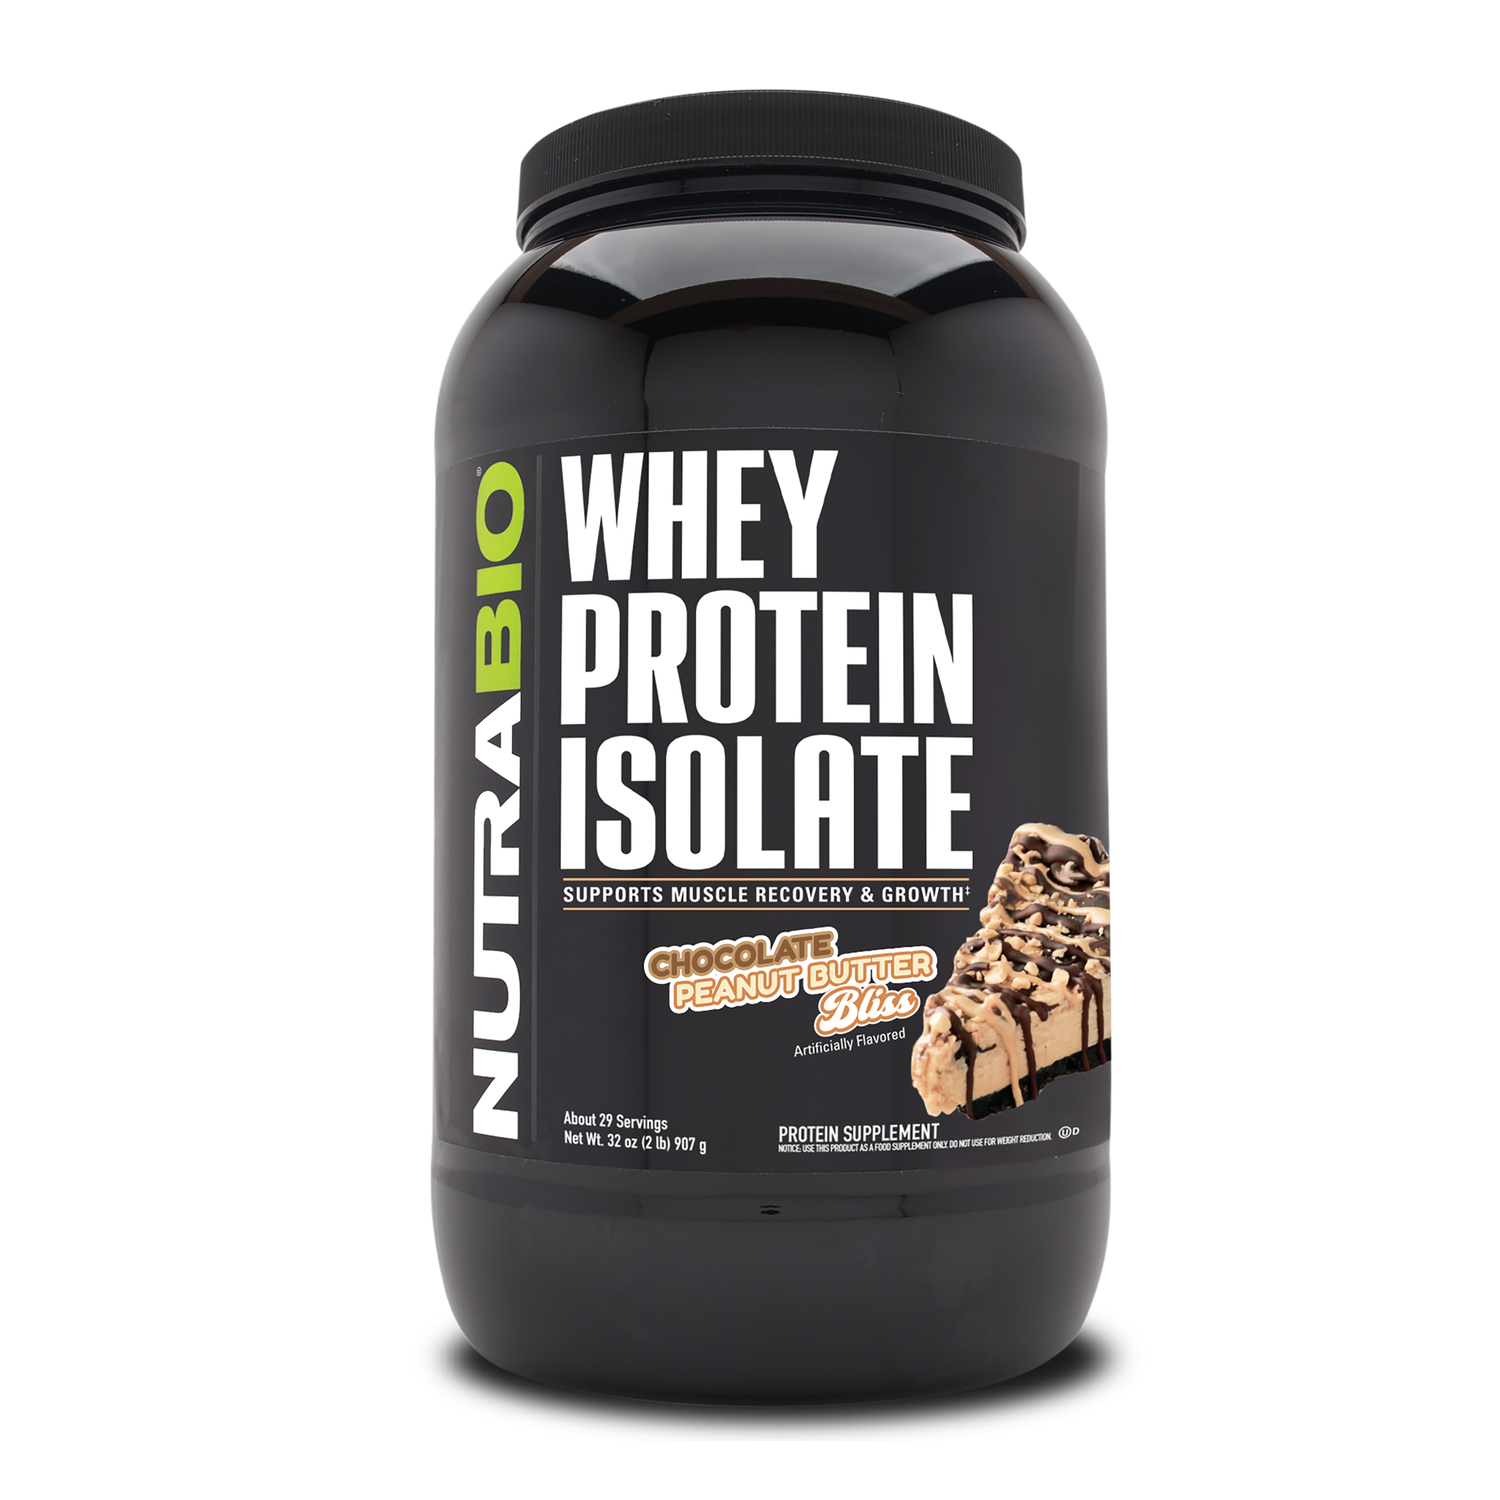 NutraBio Whey Protein Isolate - Chocolate Peanut Butter Bliss (29 Servings) - 2 lbs.